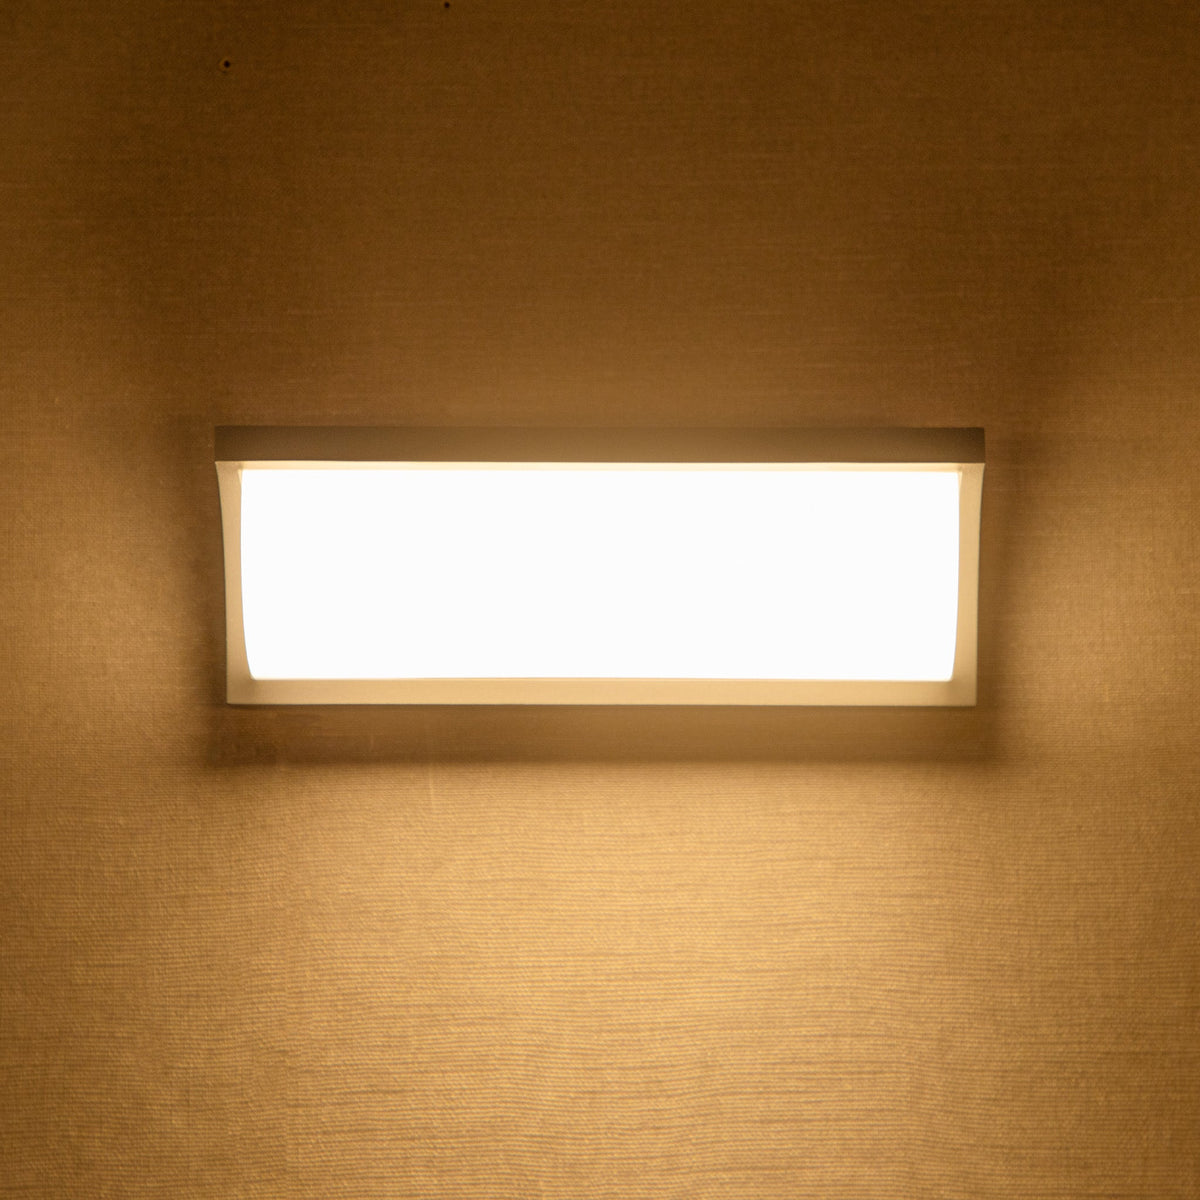 Buy Forward Looking LED Outdoor Wall Light online